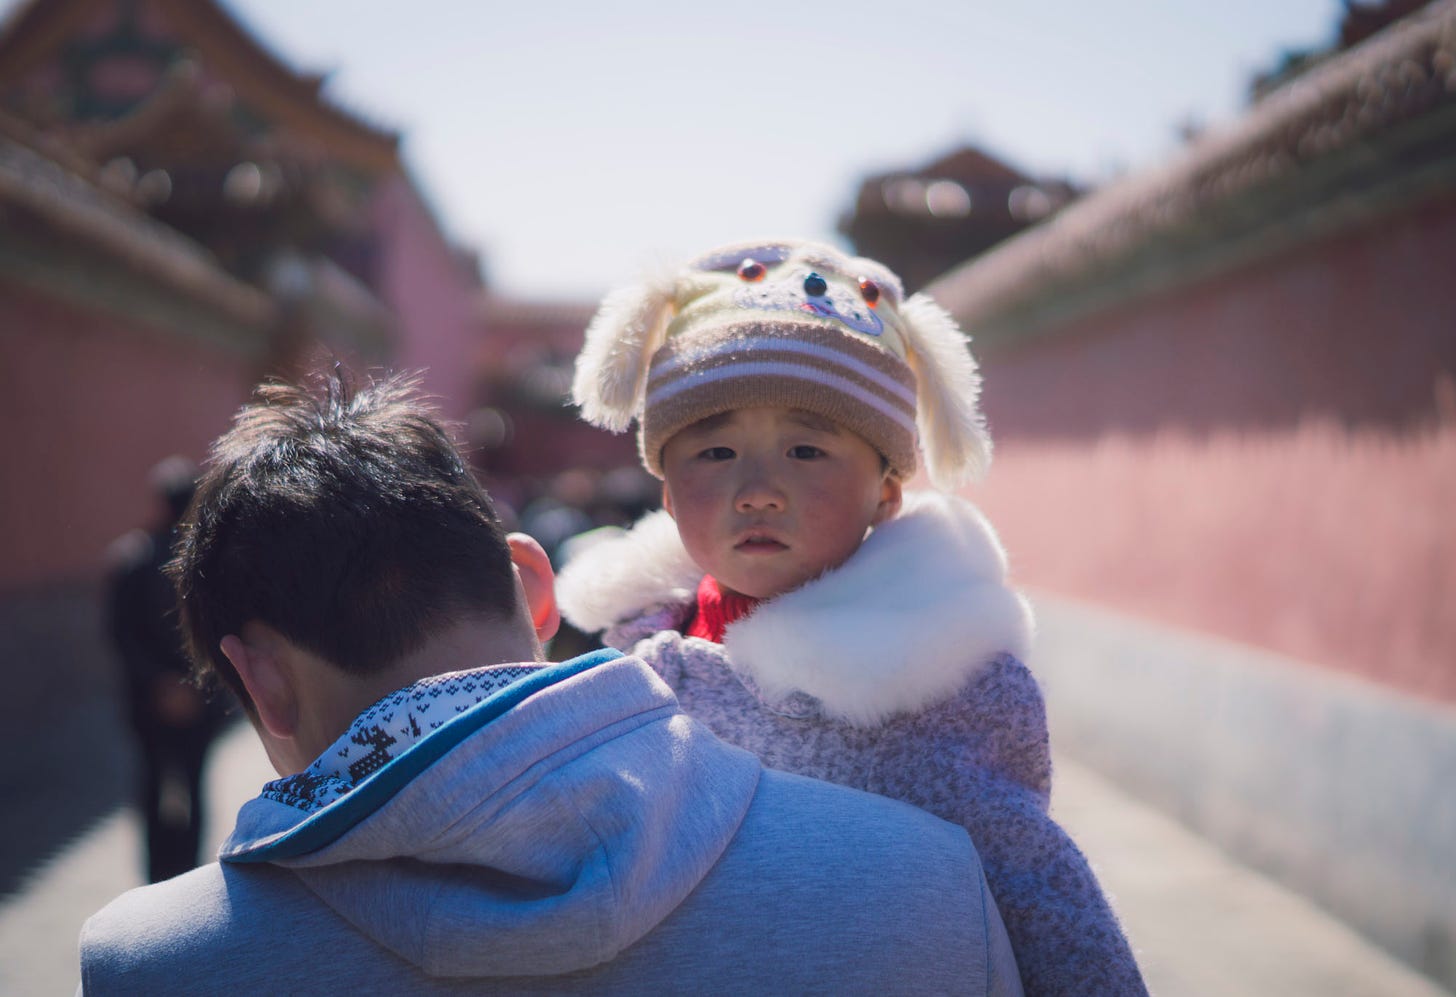 China's Invasive “Family Planning” Enforcement Still in Place after “Two- Child” Policy Begins